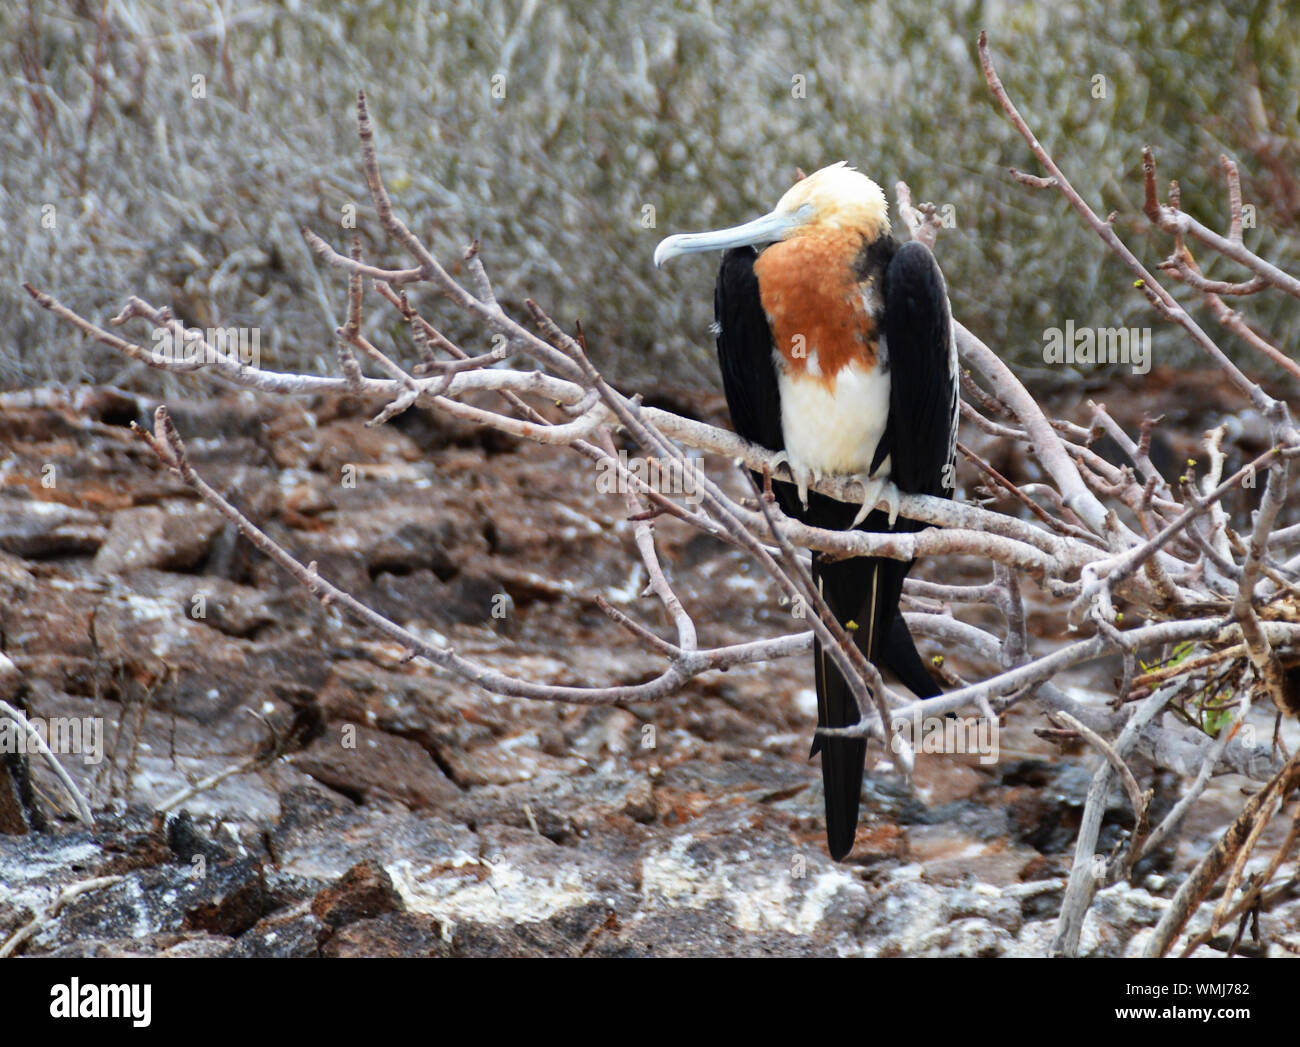 A young Frigate bird sits on a branch in the Galapagos Islands Stock Photo